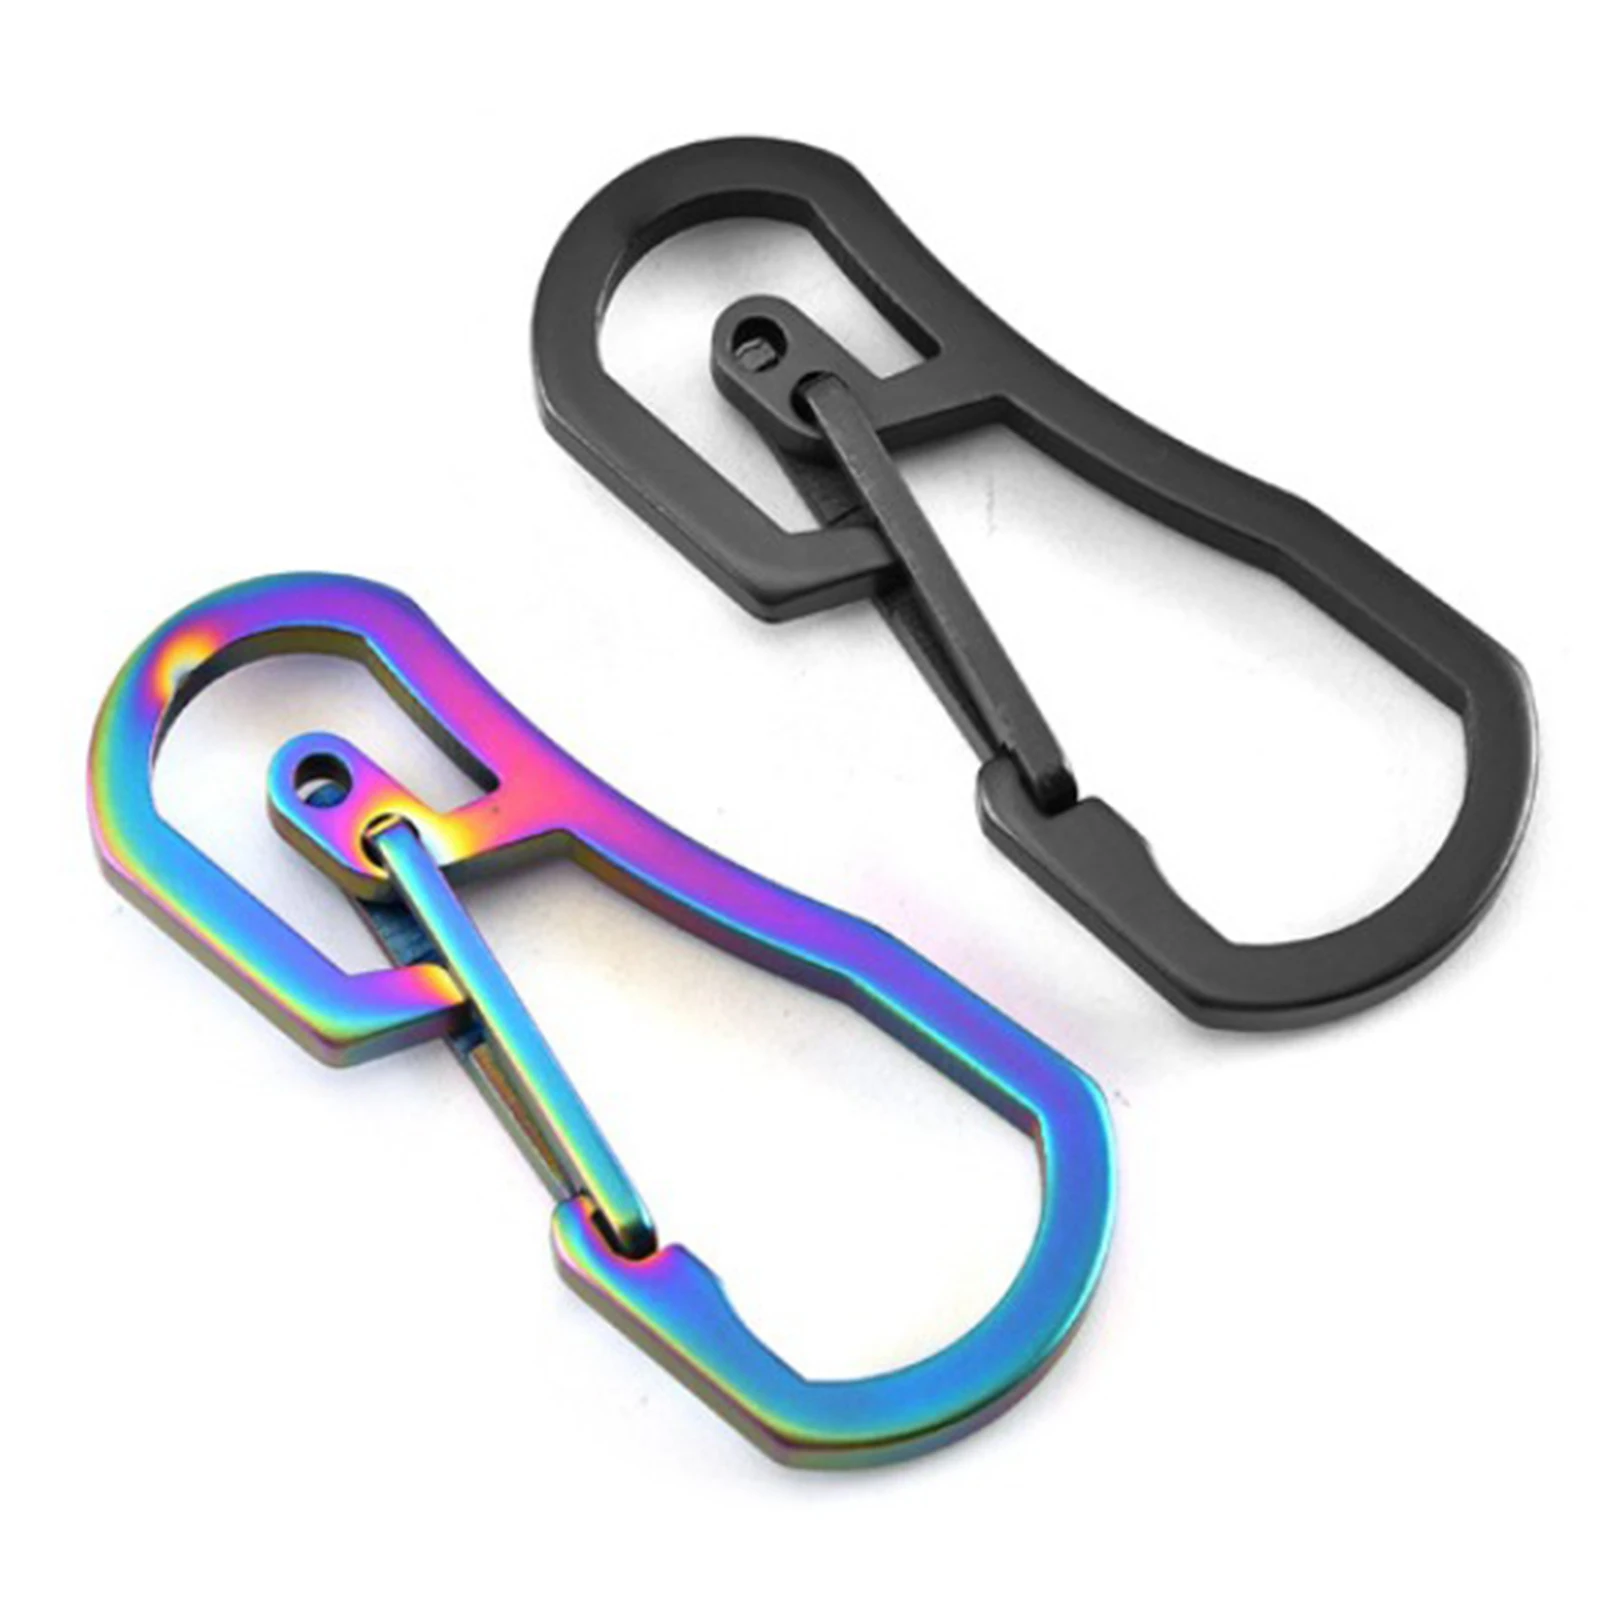 Stainless Steel Climbing Carabiner Key Chain Clip Hook Buckle Keychain Key Ring 